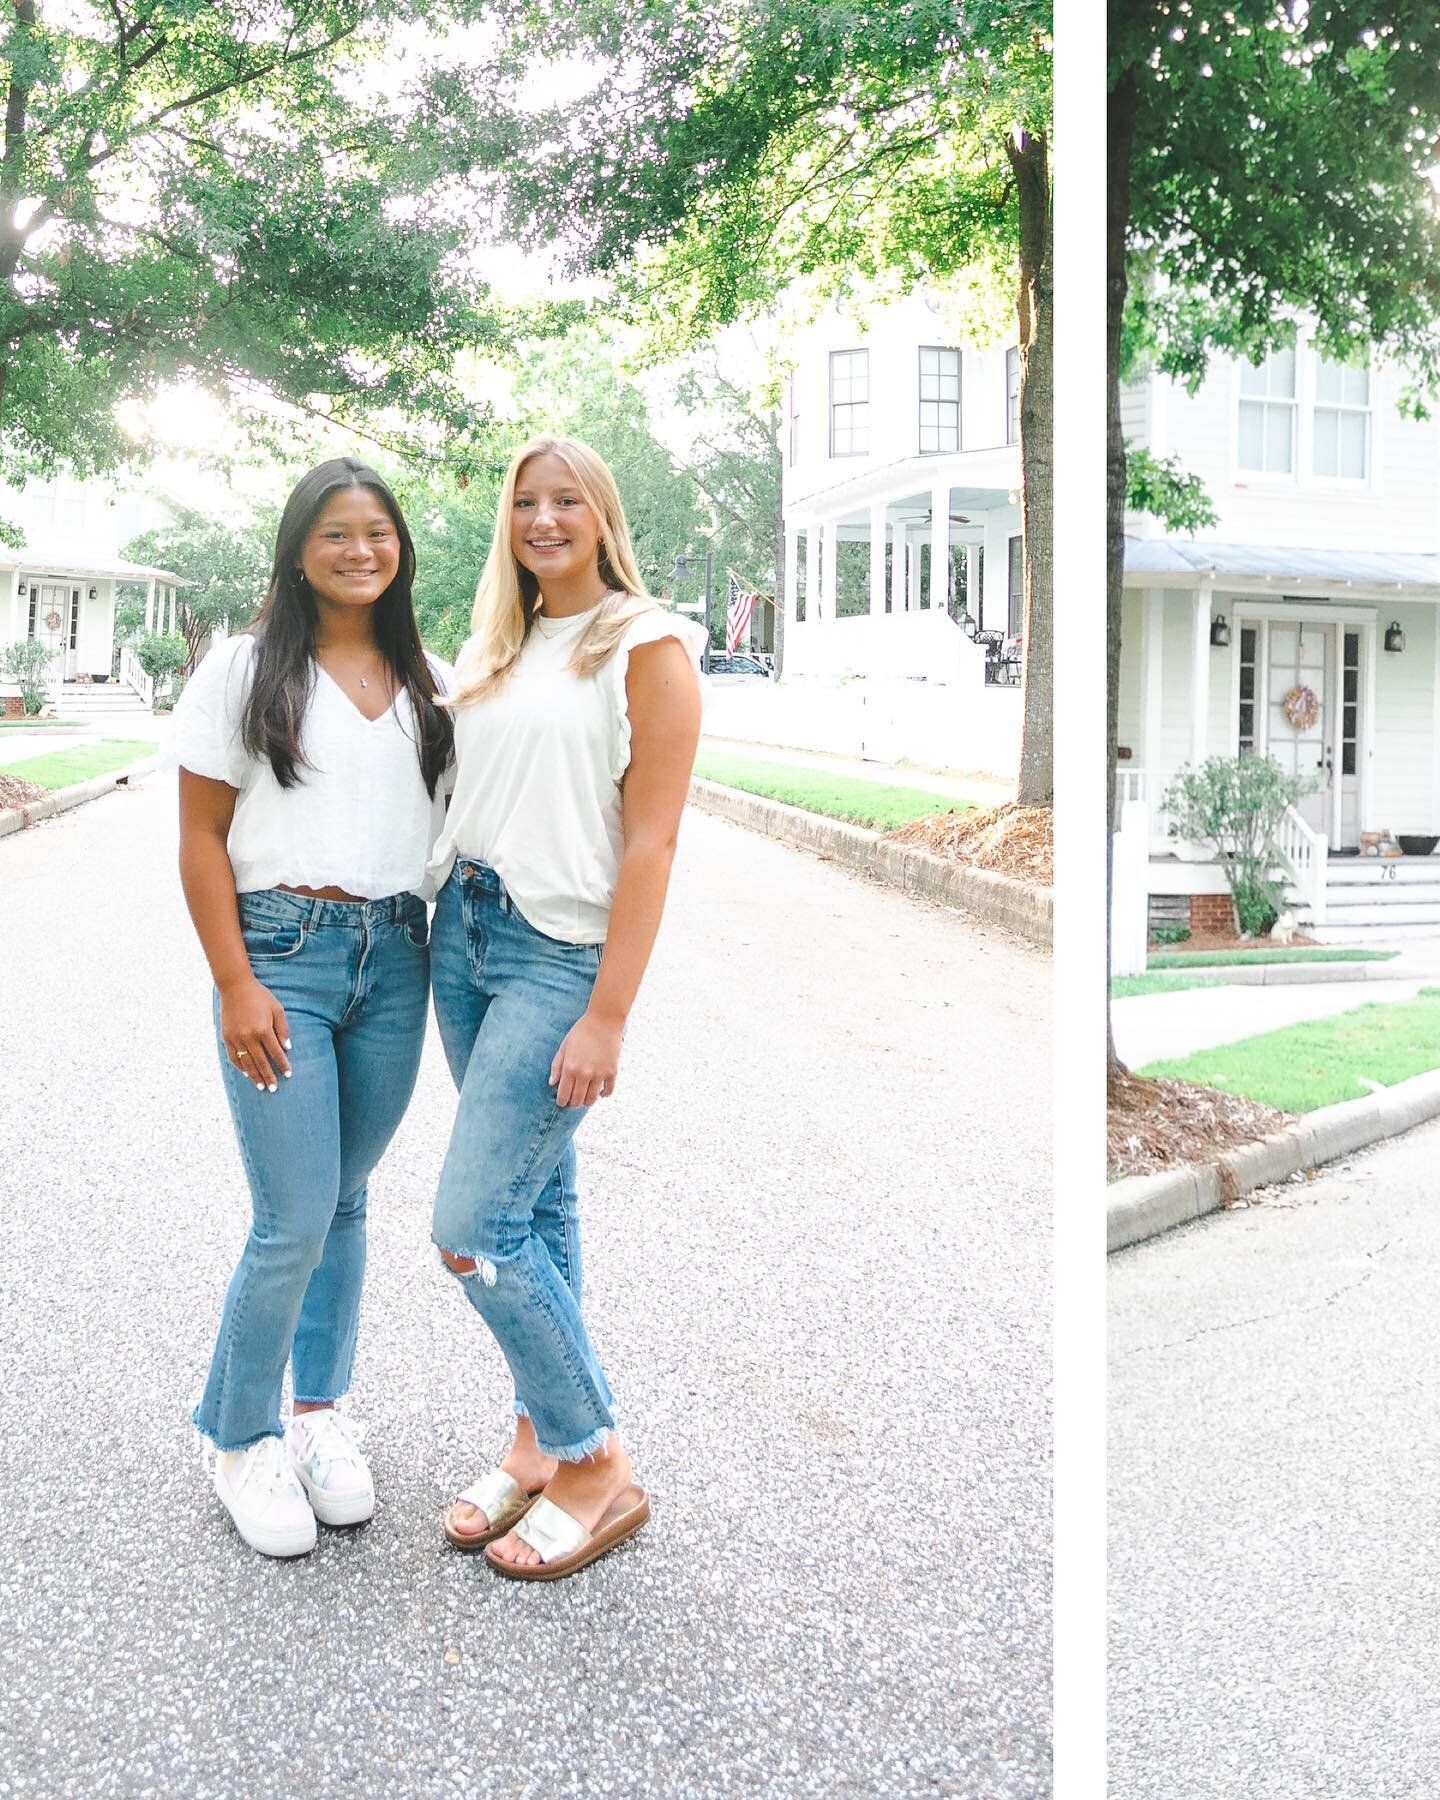 They grew up! Senior and sophomore year started yesterday, and it was hard to fathom. #highschool #firstday #pikeroad